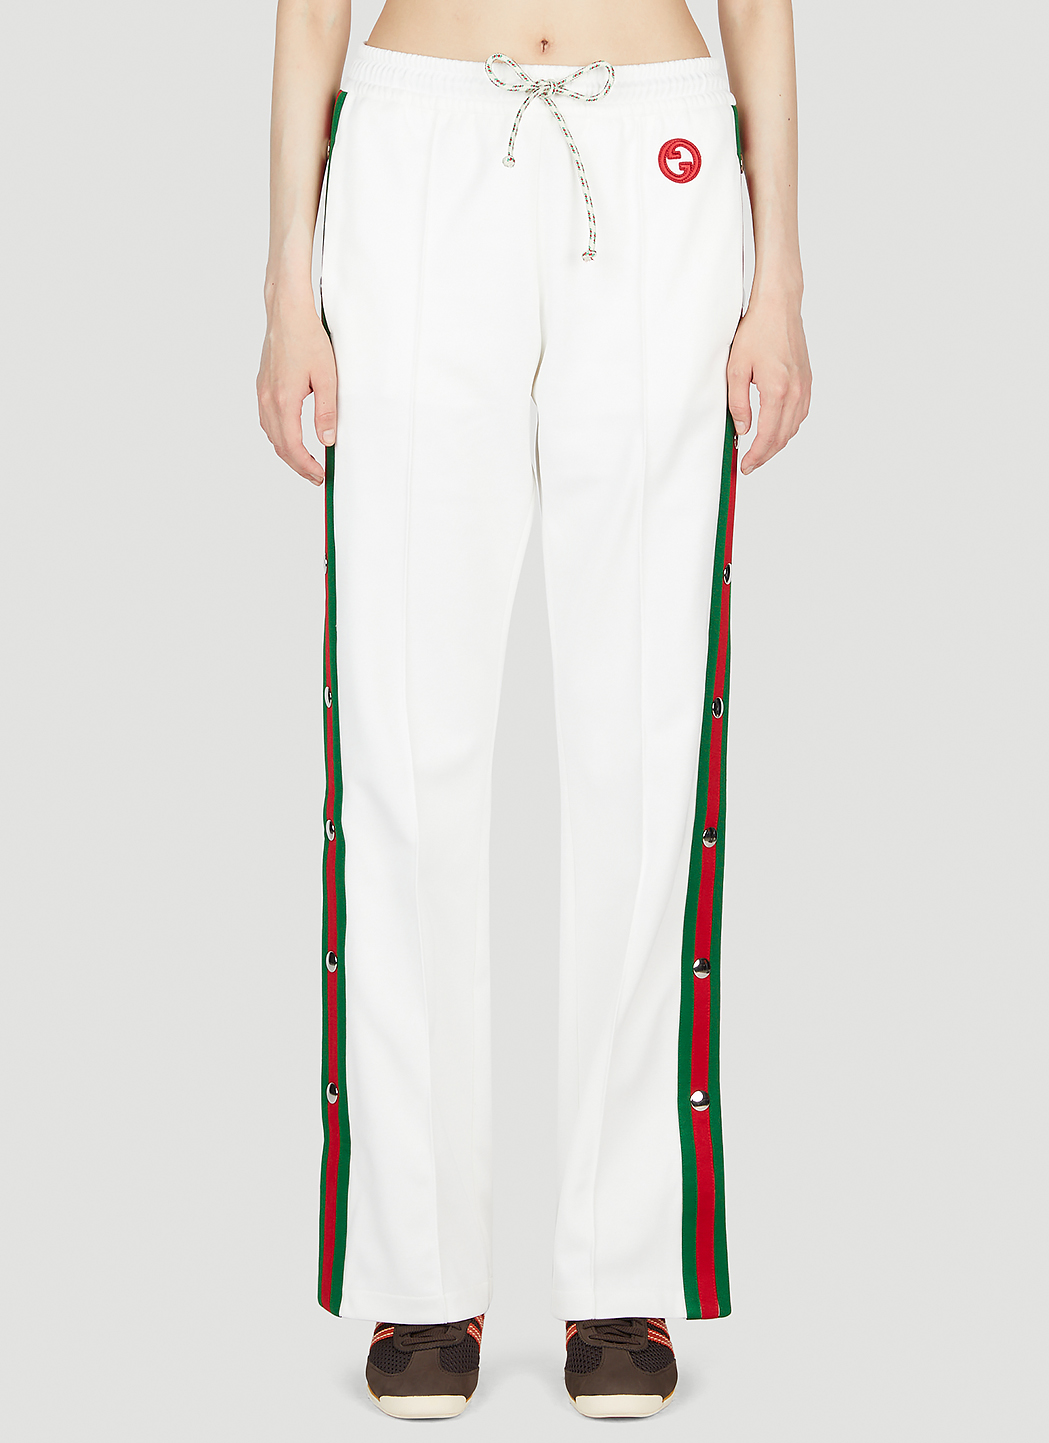 Mens Contrast Popper Track Pants  Mens Clothing from Cooshticom